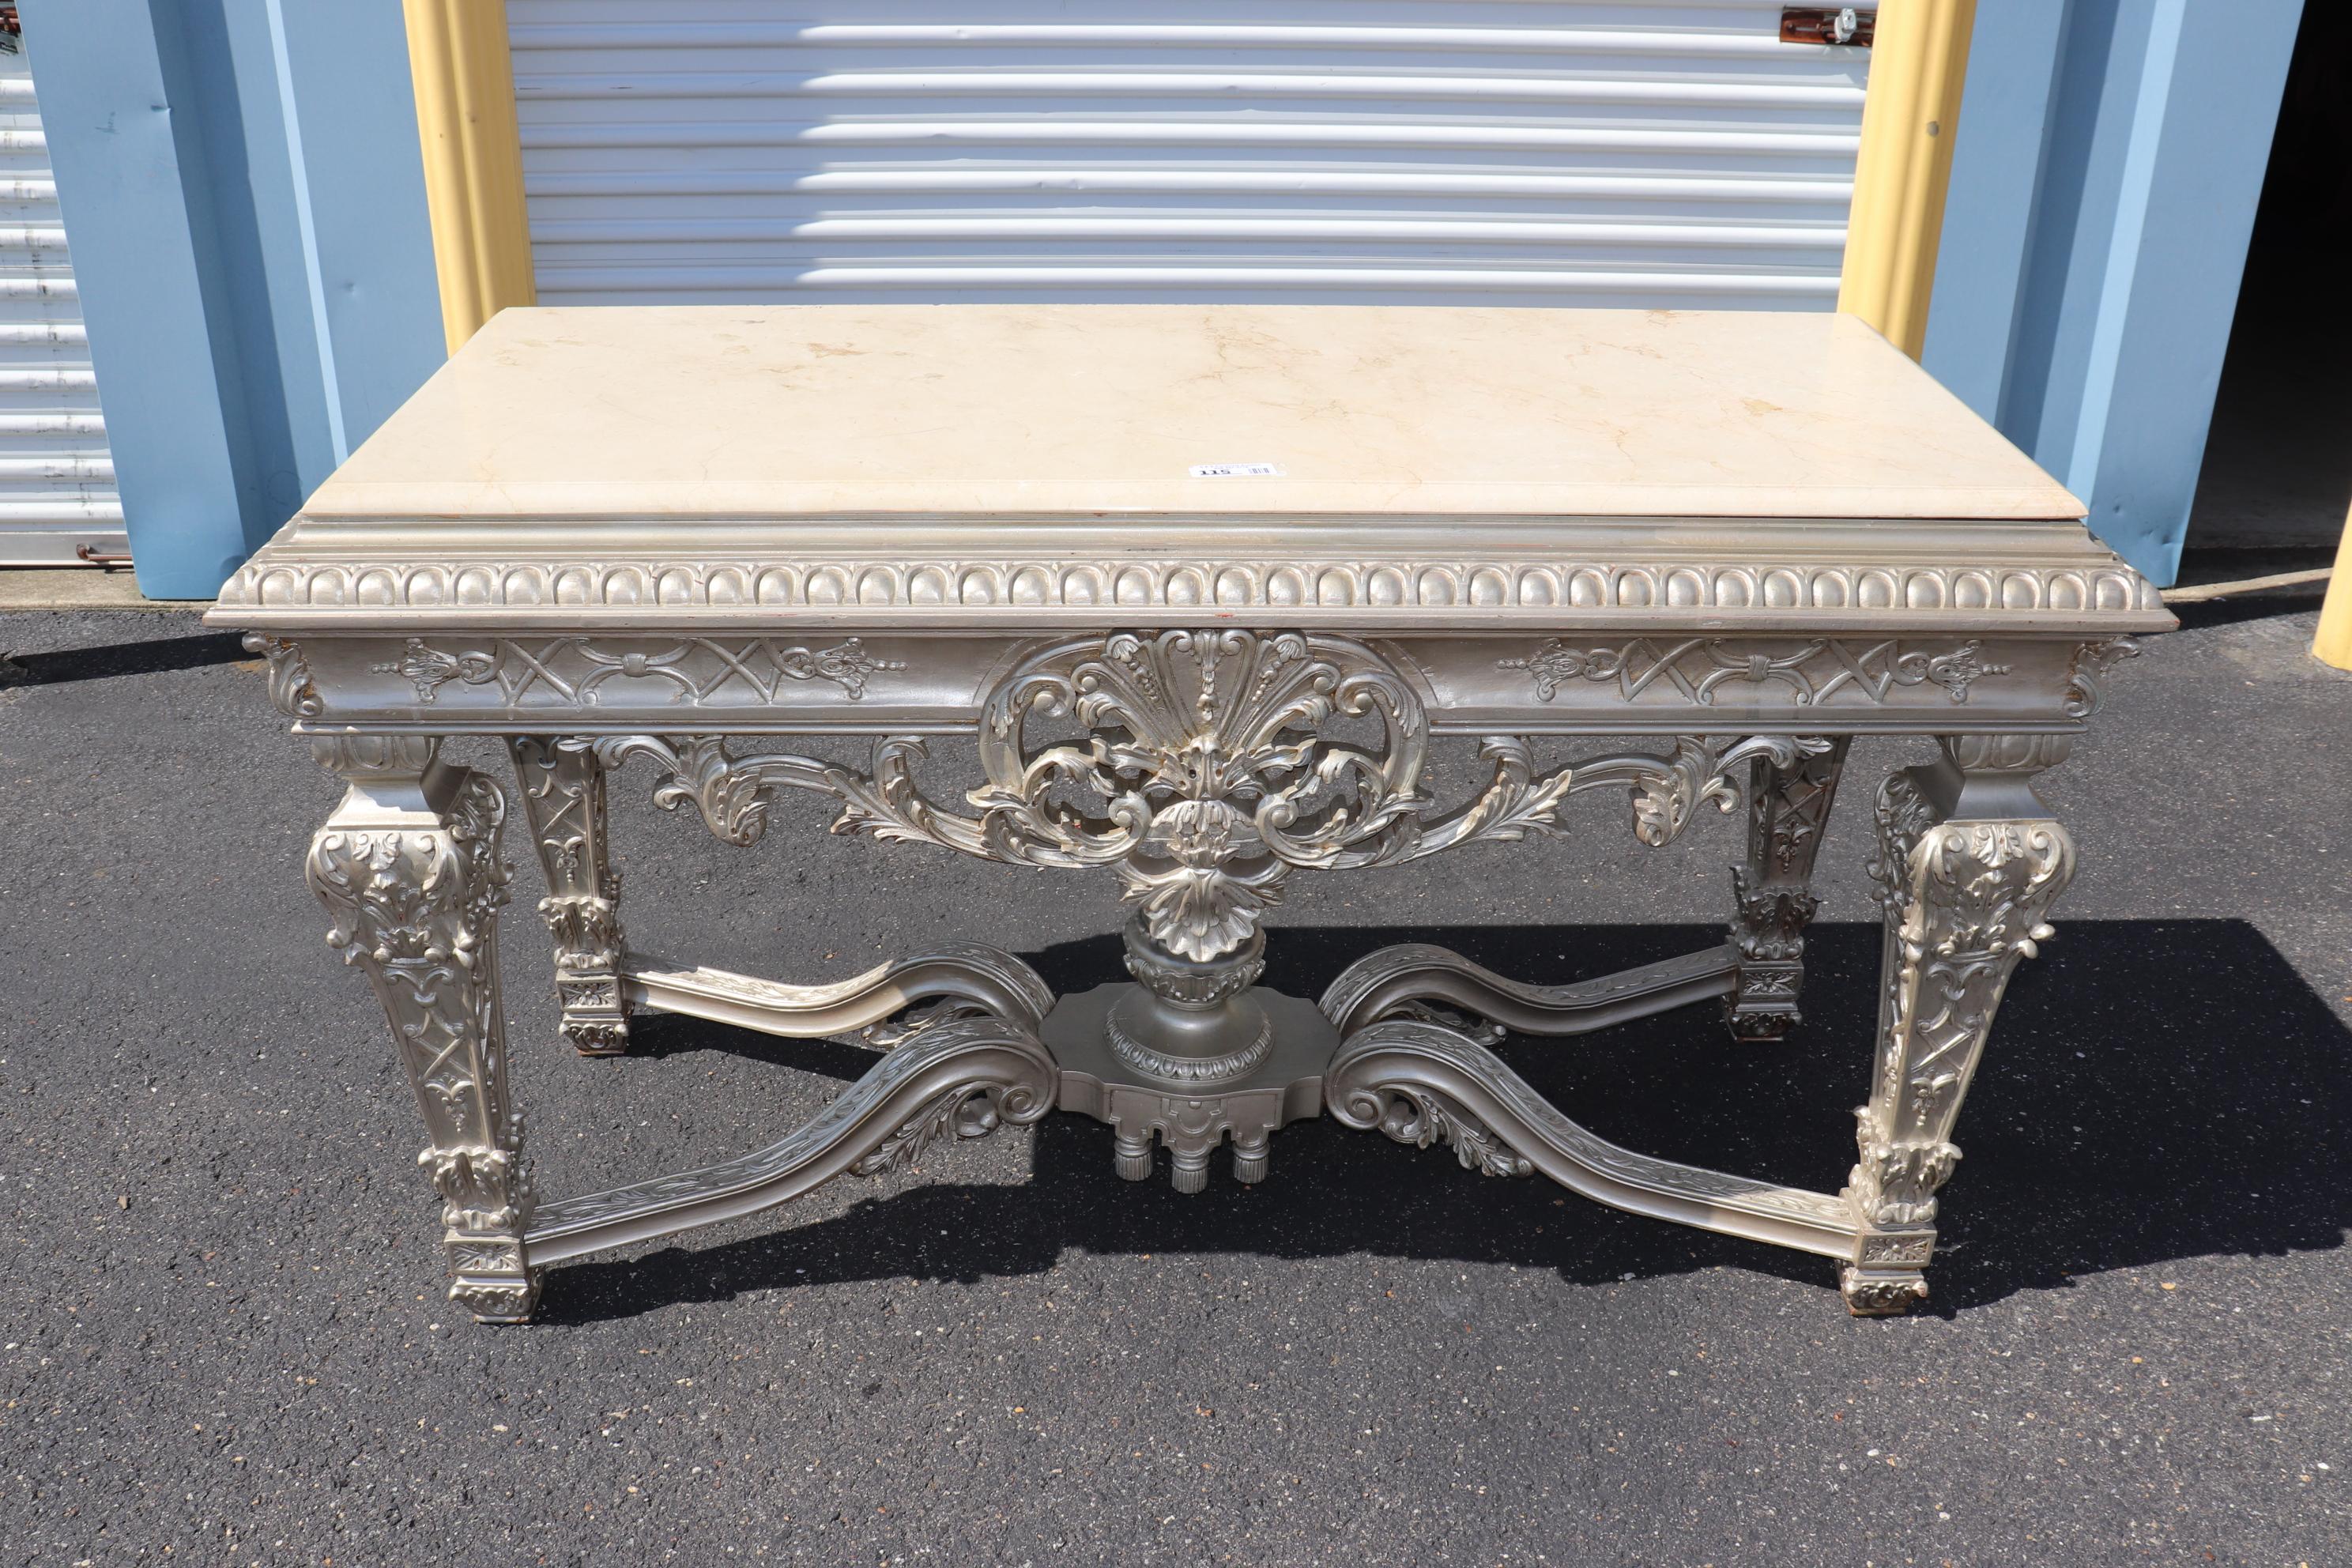 This is a gorgeous console table designed in the Georgian manner but could also be used as a Louis XIV because they have a similar design. The table is in good condition and simply has an inventory sticker on top. The table dates to the 1960s era